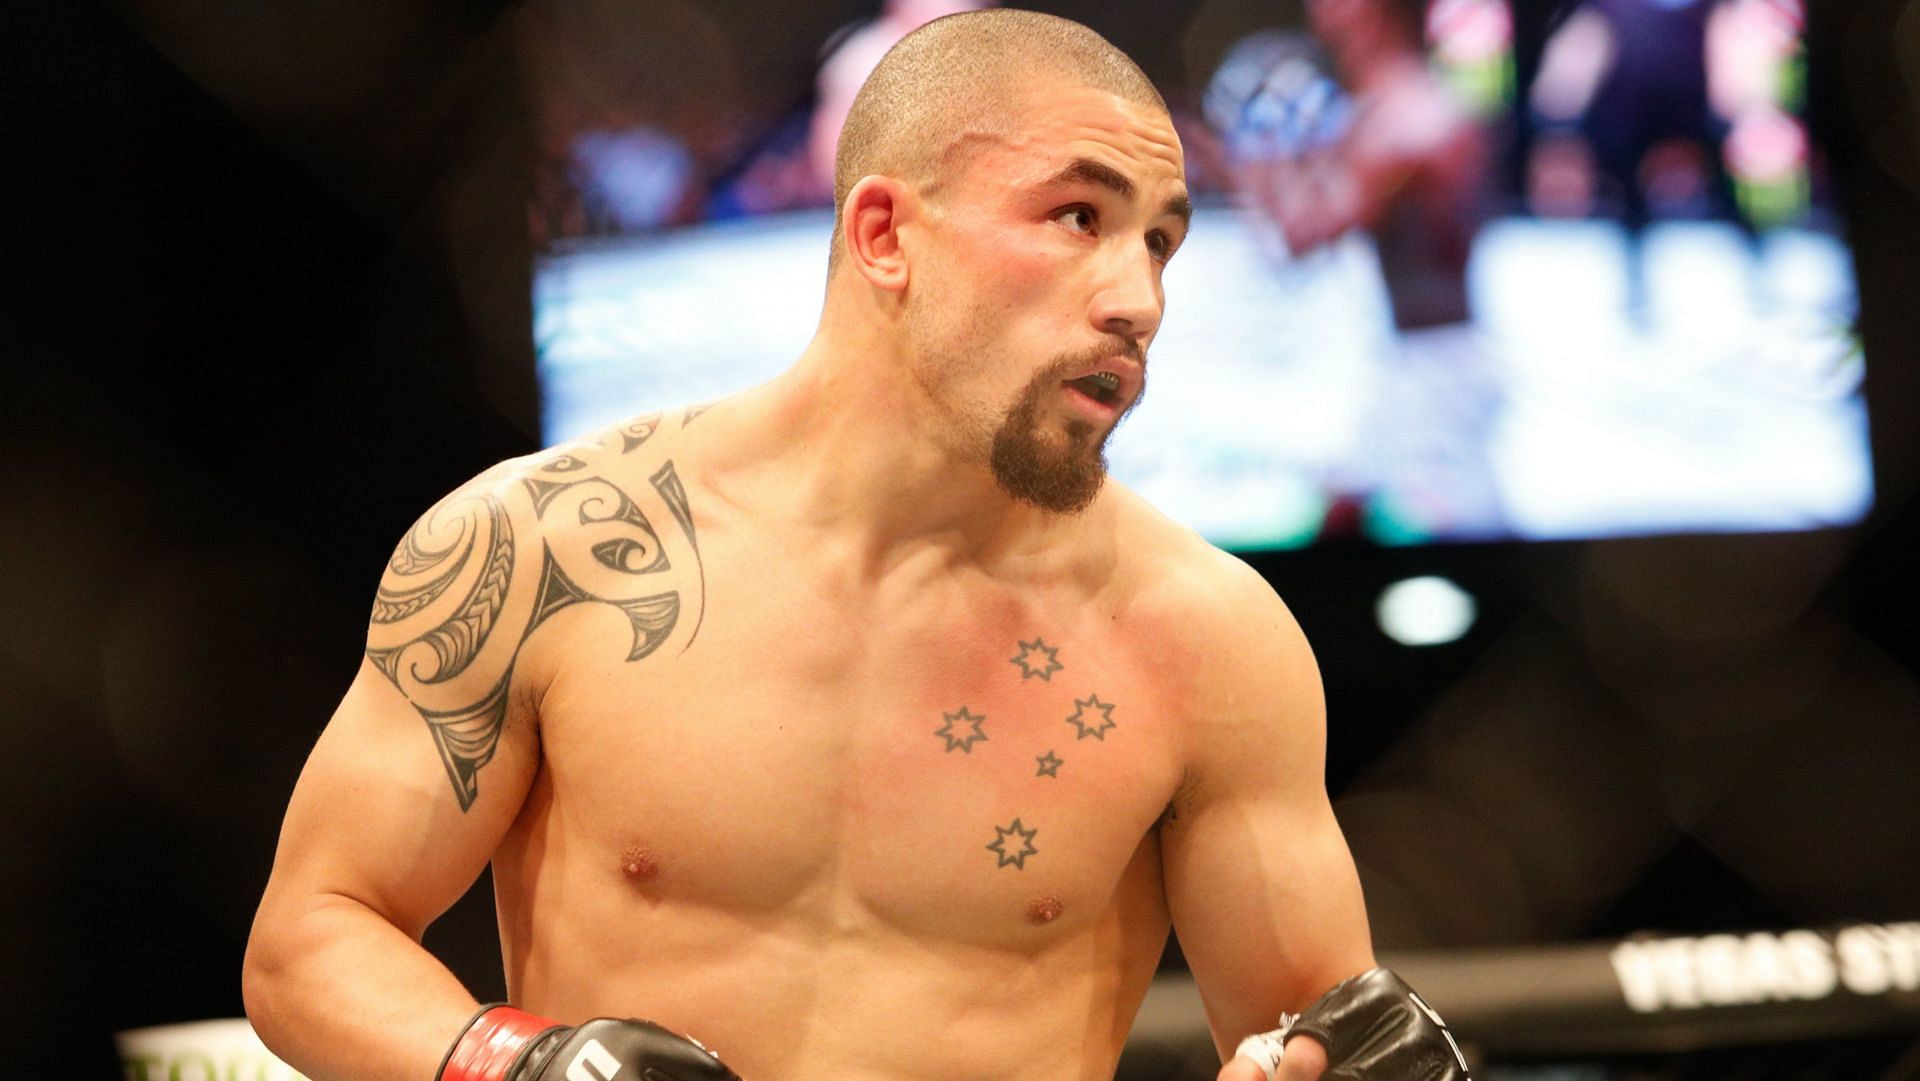 Robert Whittaker was the first fighter from Down Under to claim UFC gold